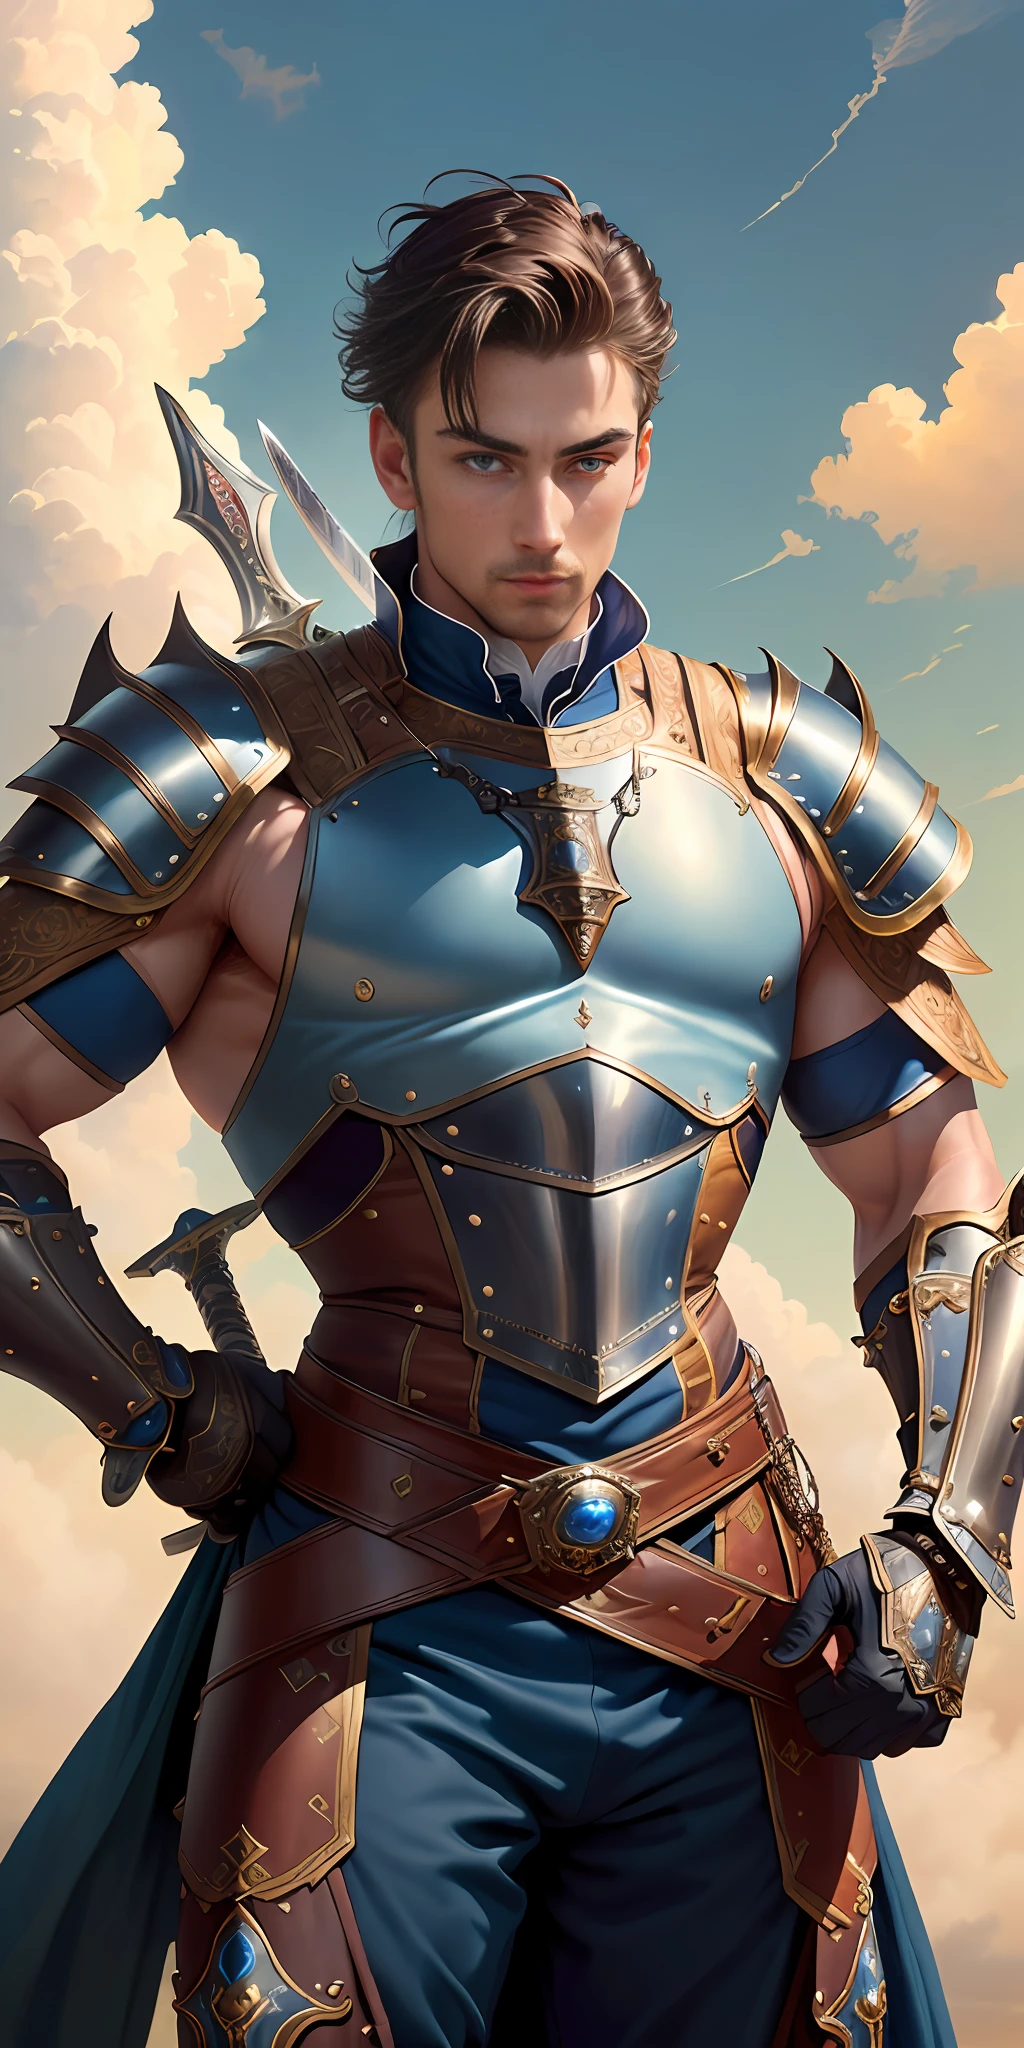 best quality)), detailed, (attractive but tasteful)) male warrior,  (((wearing Victorian armor))), ((dreamlike pose)) - SeaArt AI